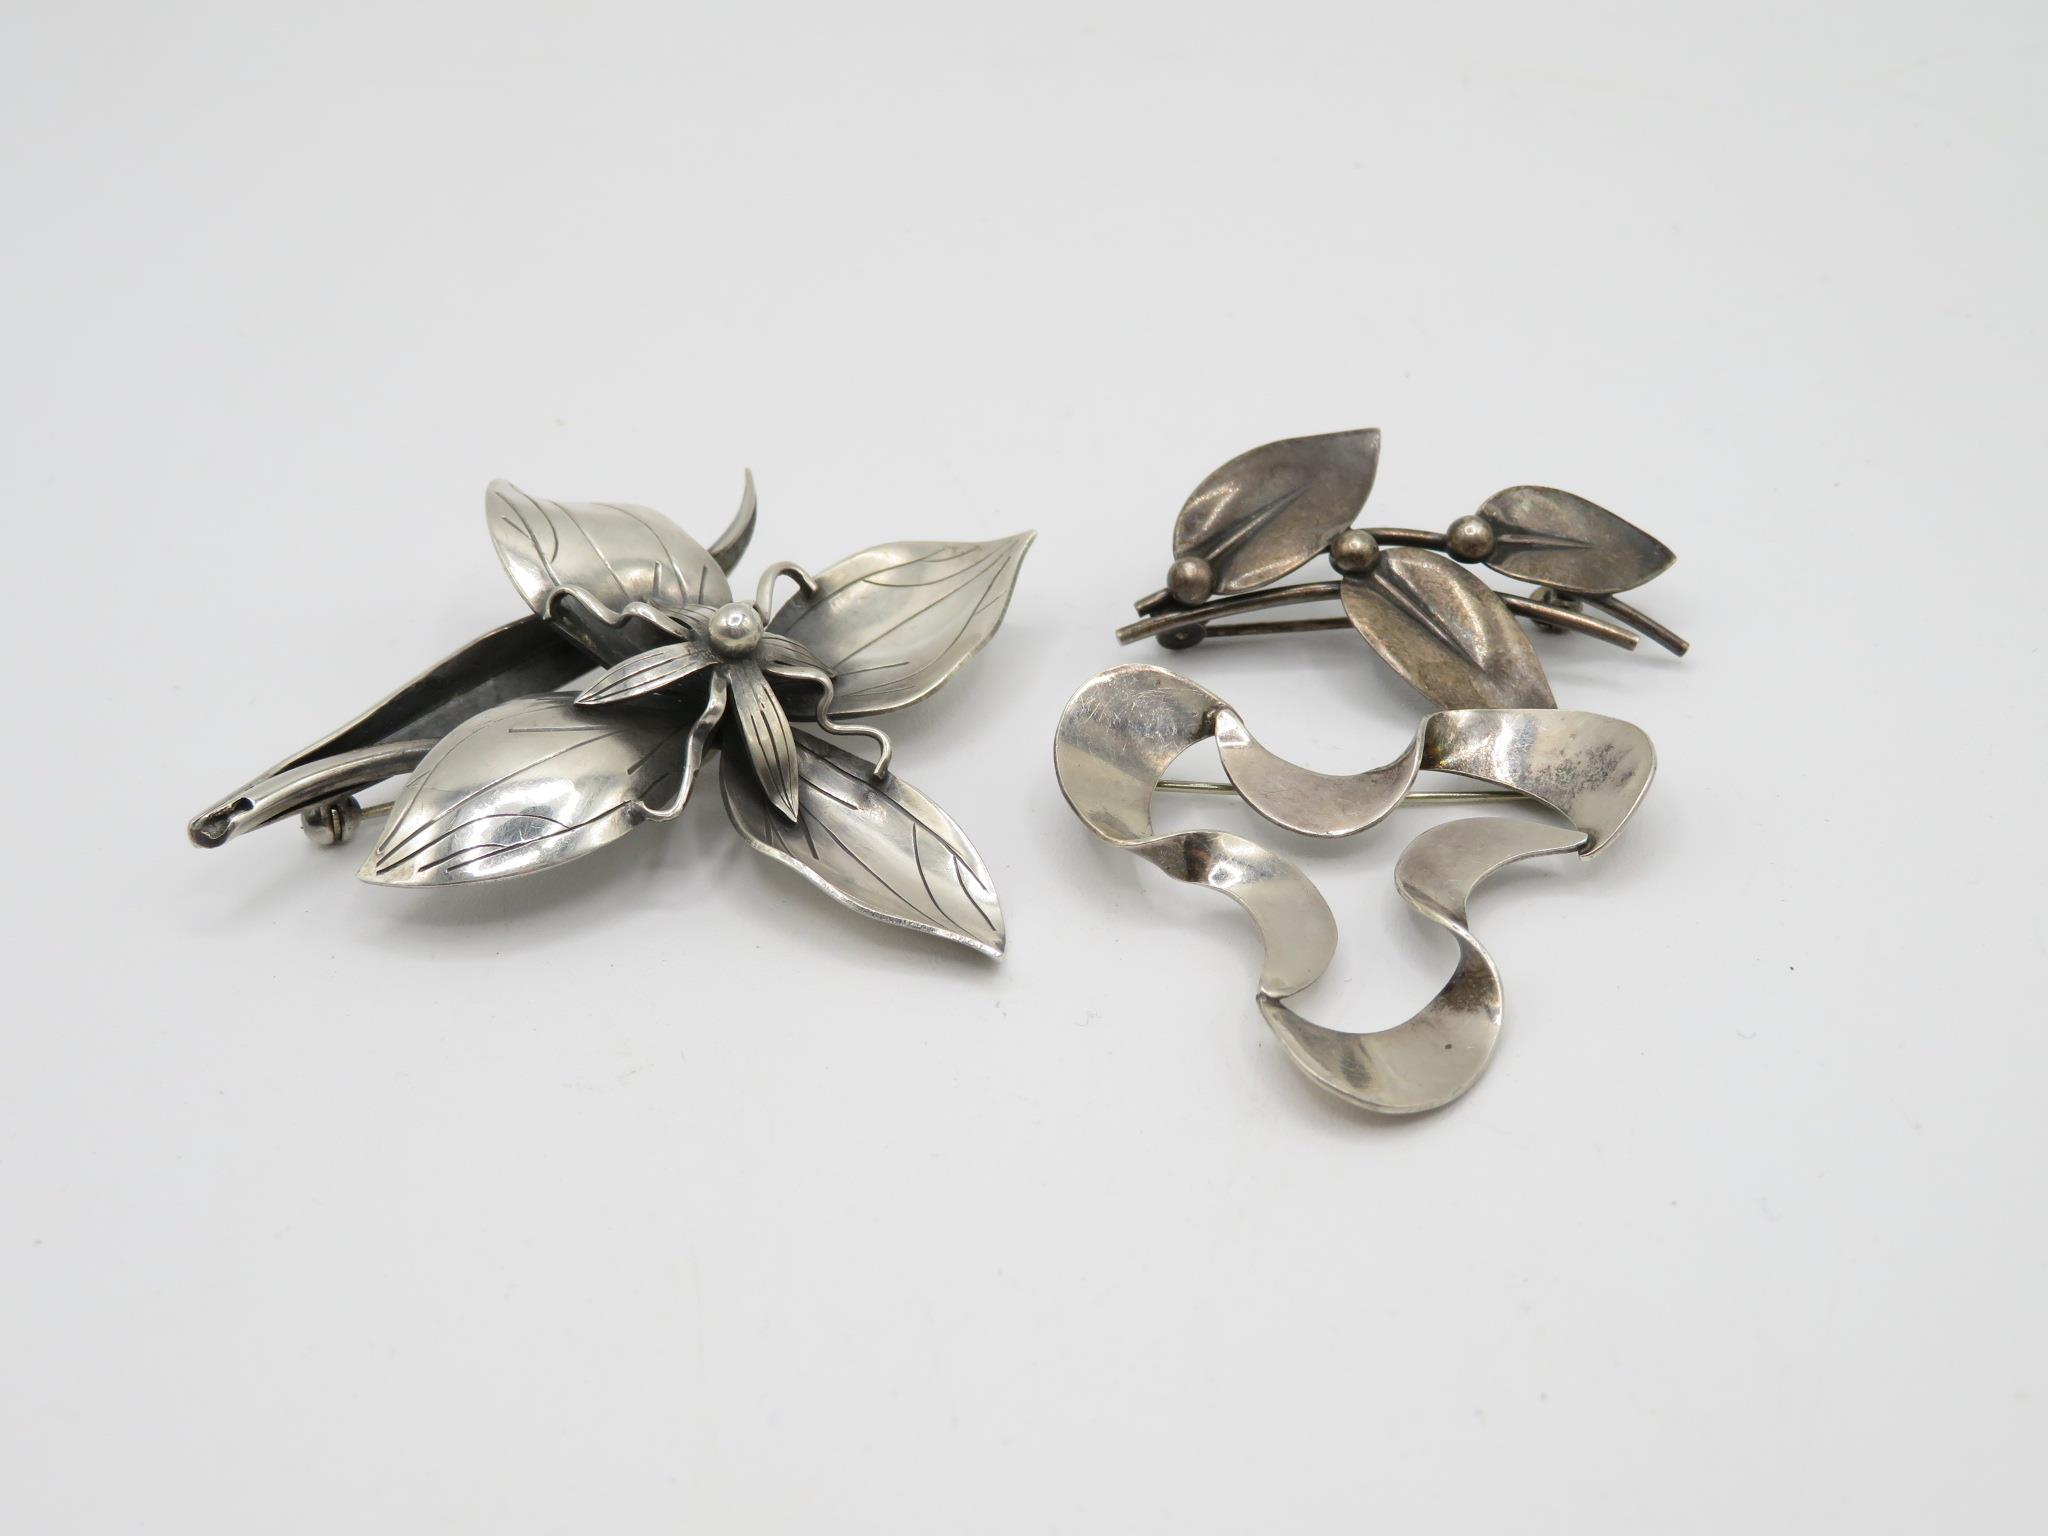 Three Scandinavian Silver Brooches (25g) - Image 2 of 3